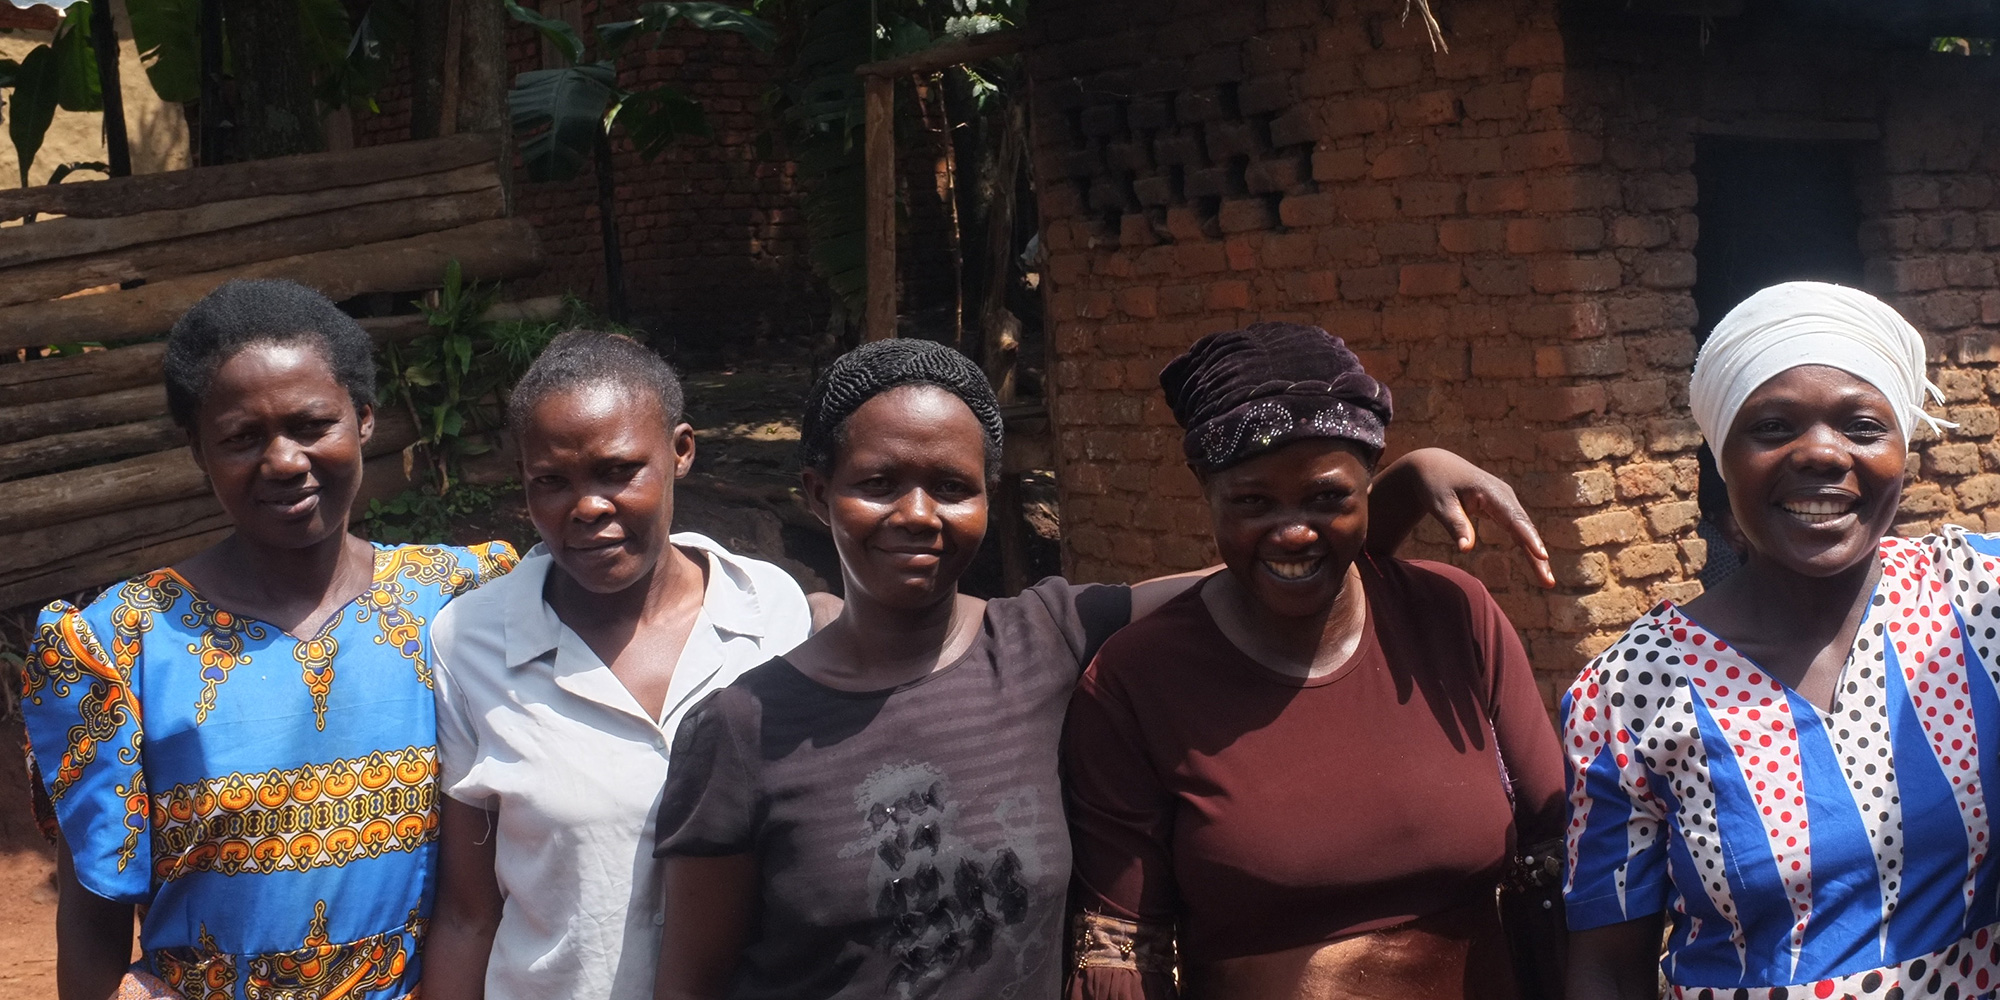 Smiling women with businesses from East Africa